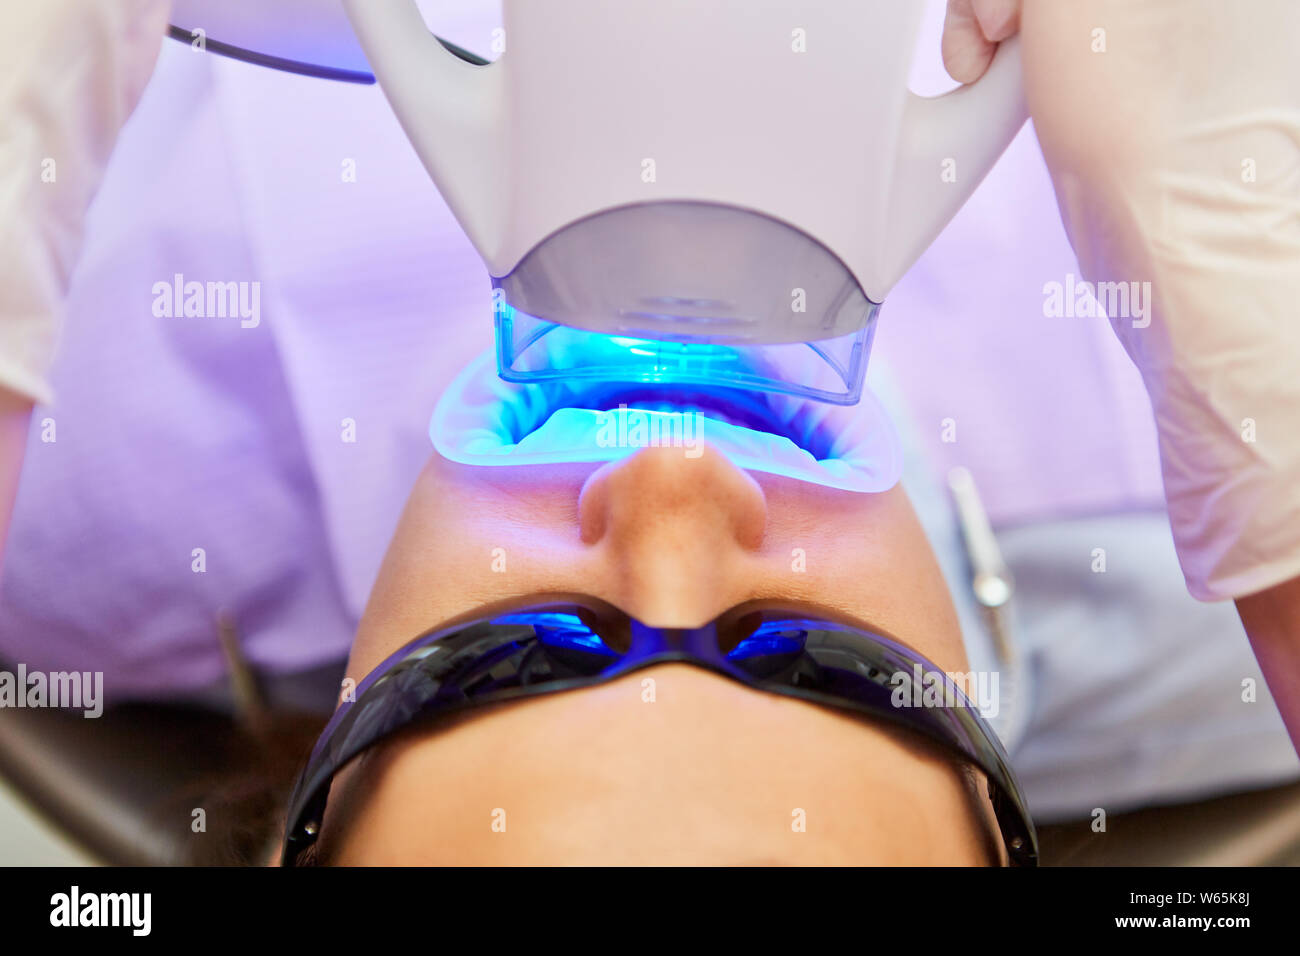 Blue LED light is used when whitening the dentist Stock Photo